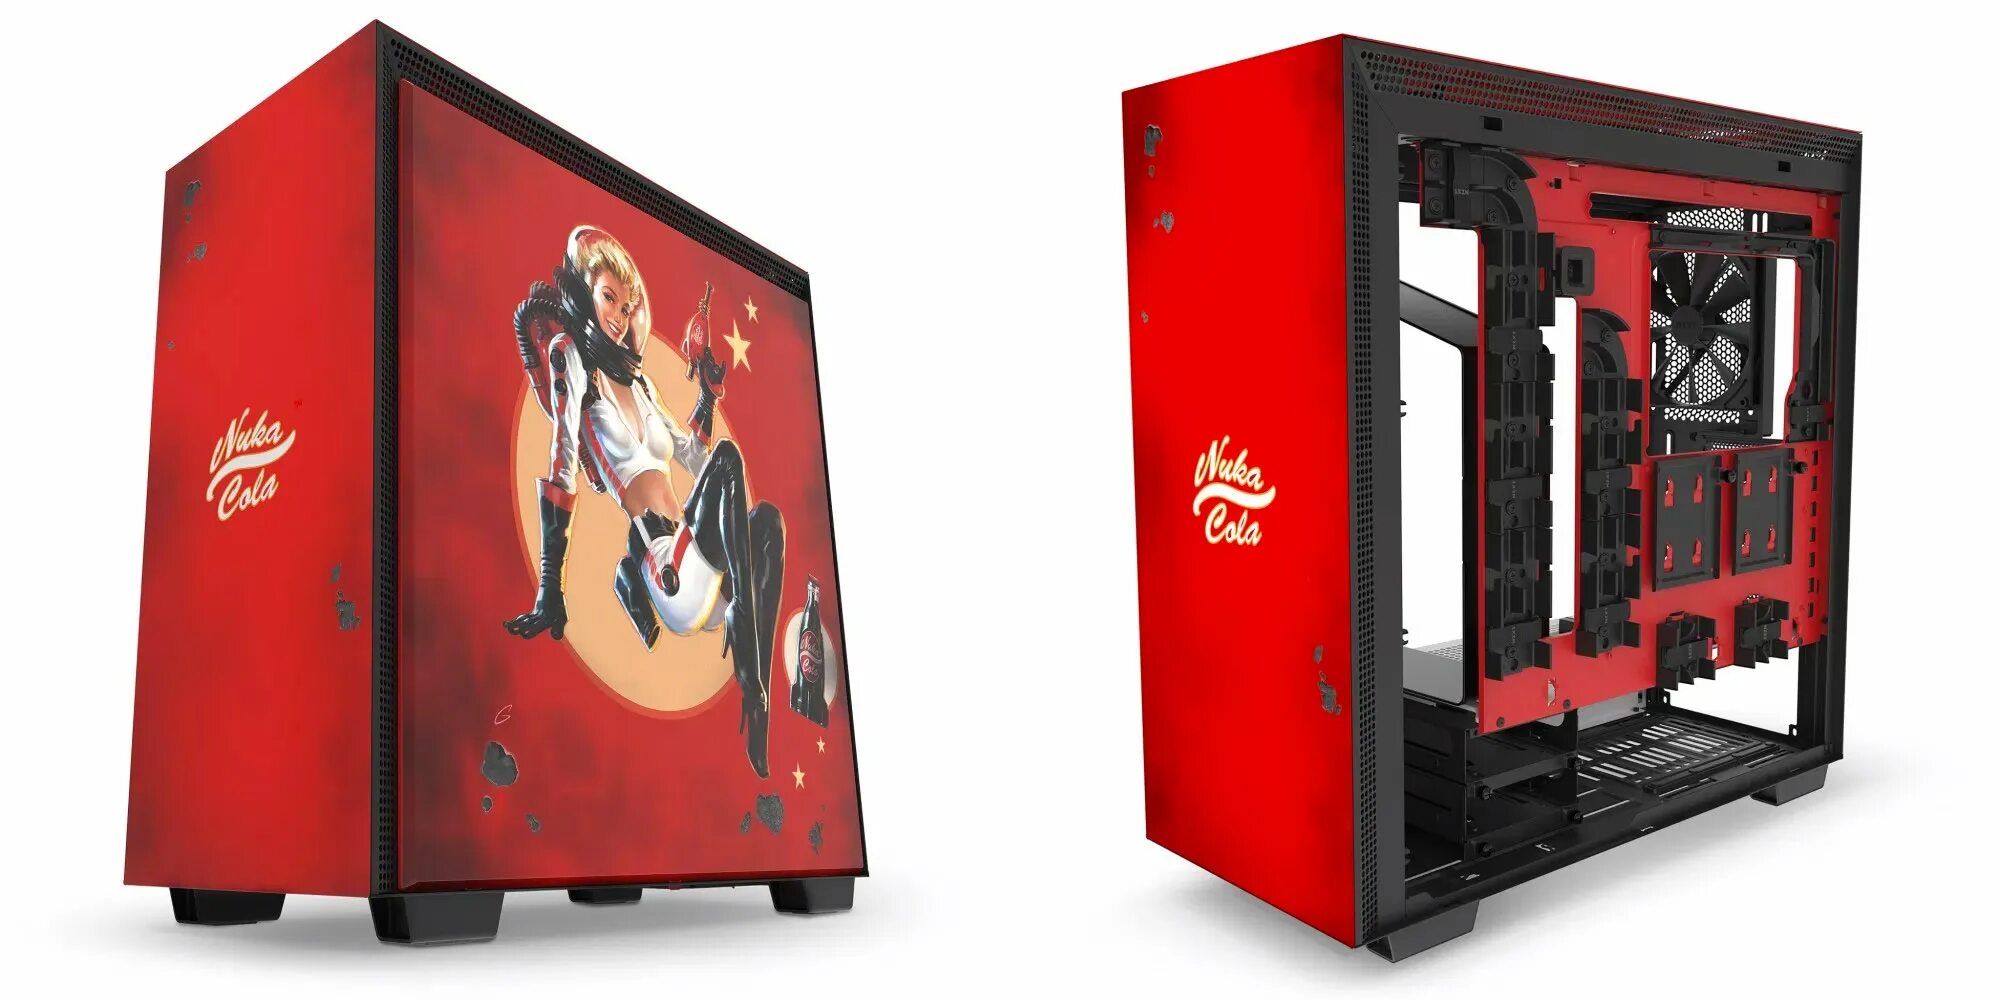 NZXT h700 Nuka Cola. NZXT h700. NZXT Fallout корпус. Корпус NZXT Fallout h500.